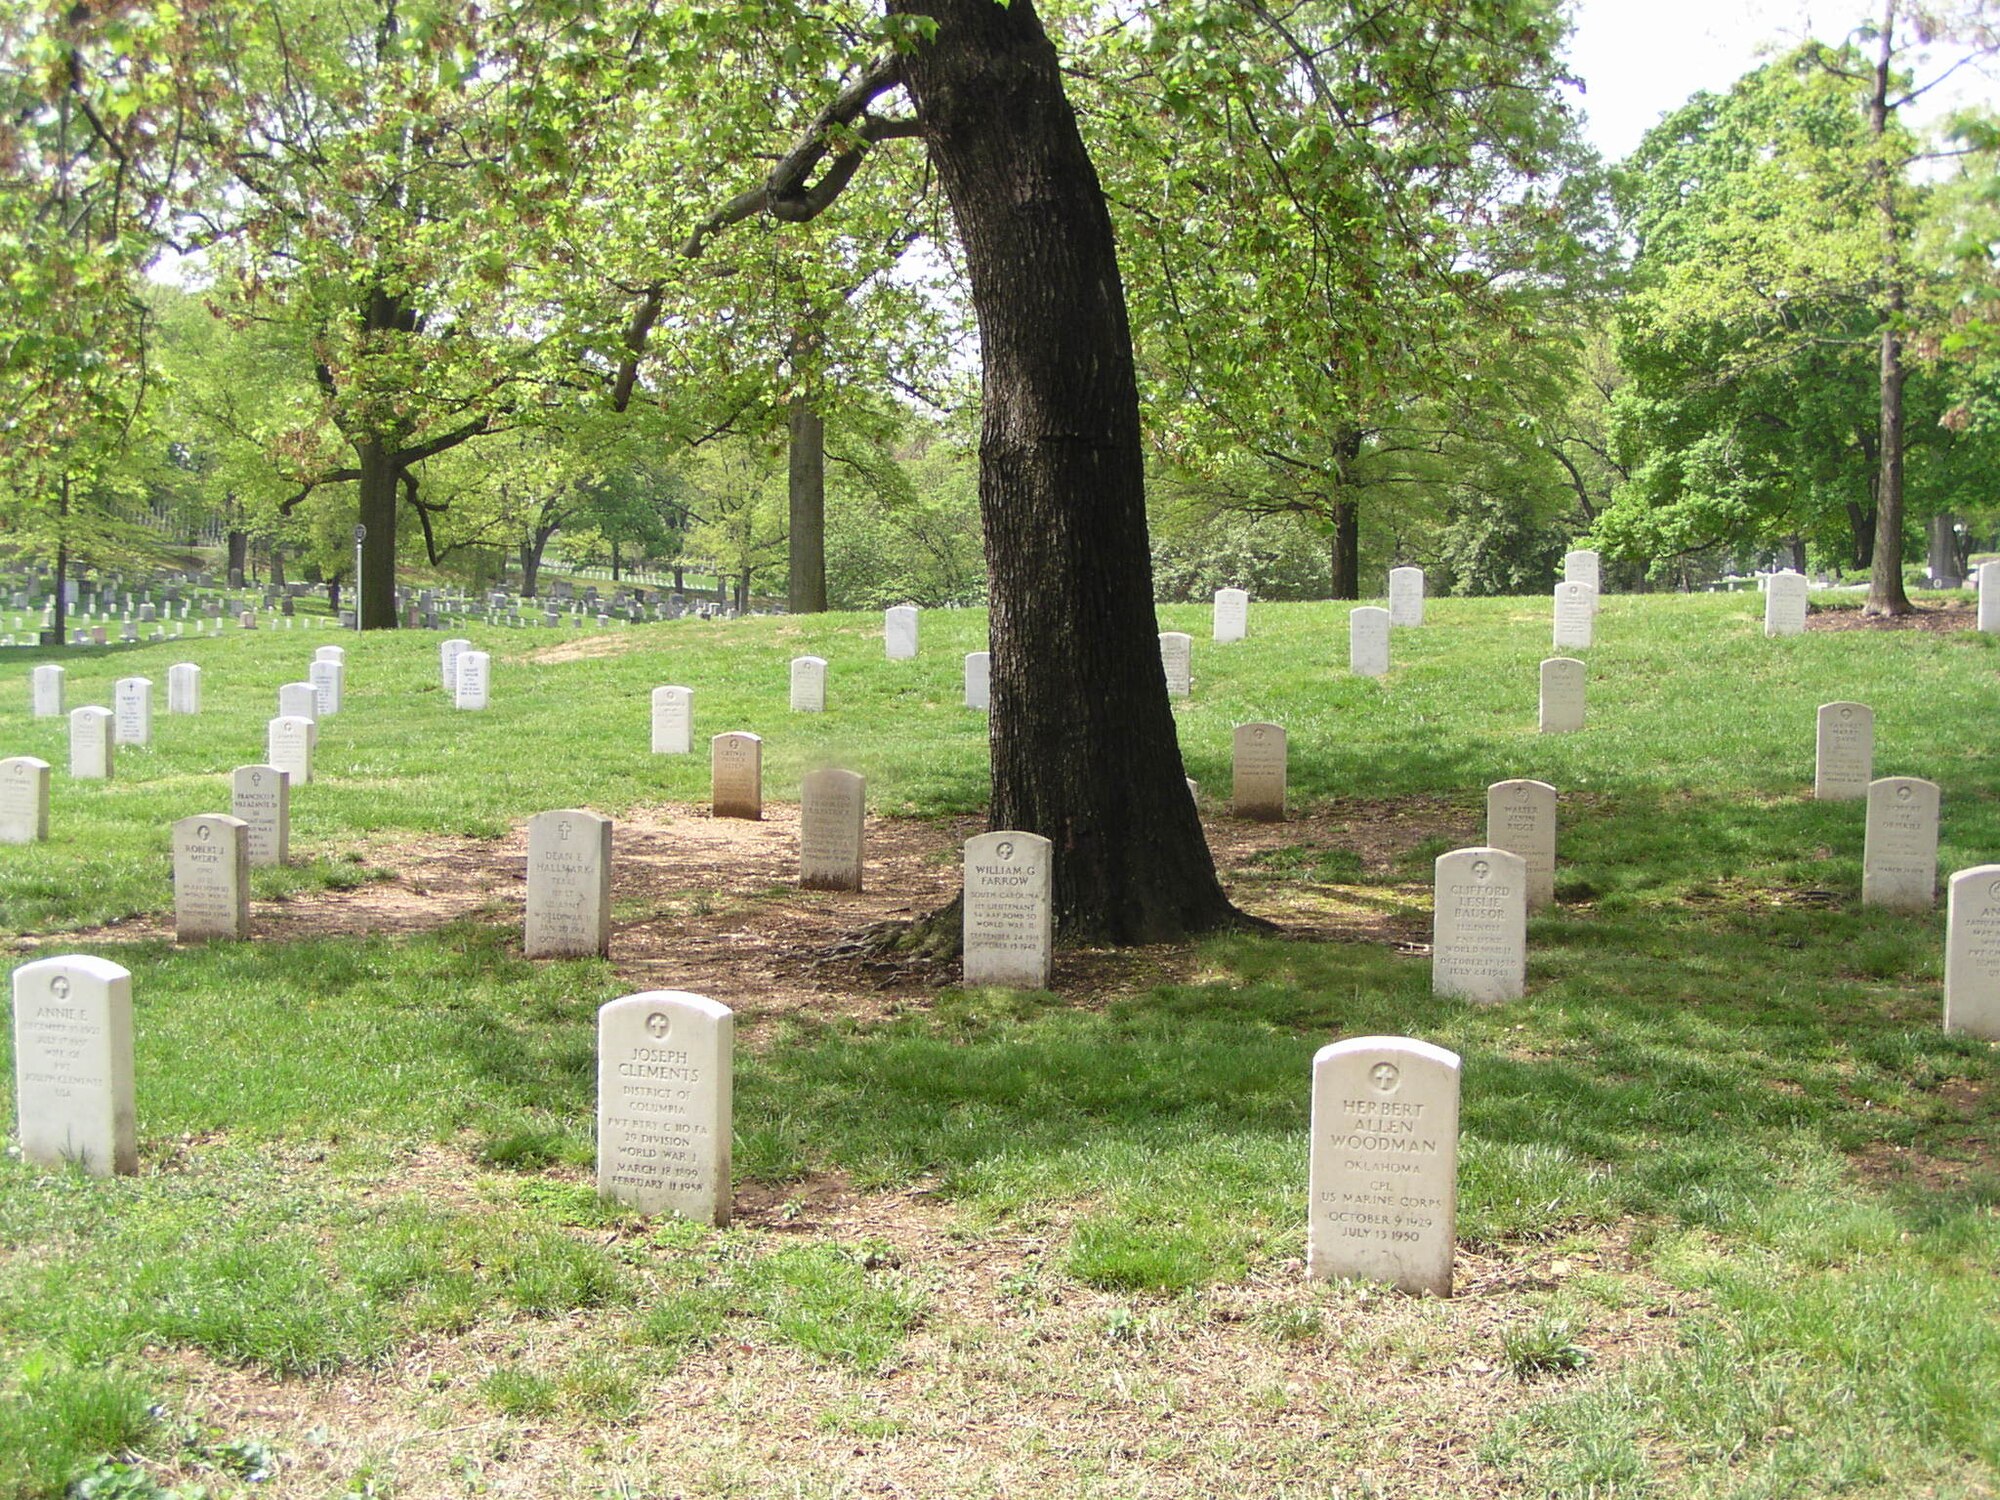 Farrow’s grave at Arlington National Cemetery in front of a tree. (Courtesy photo)